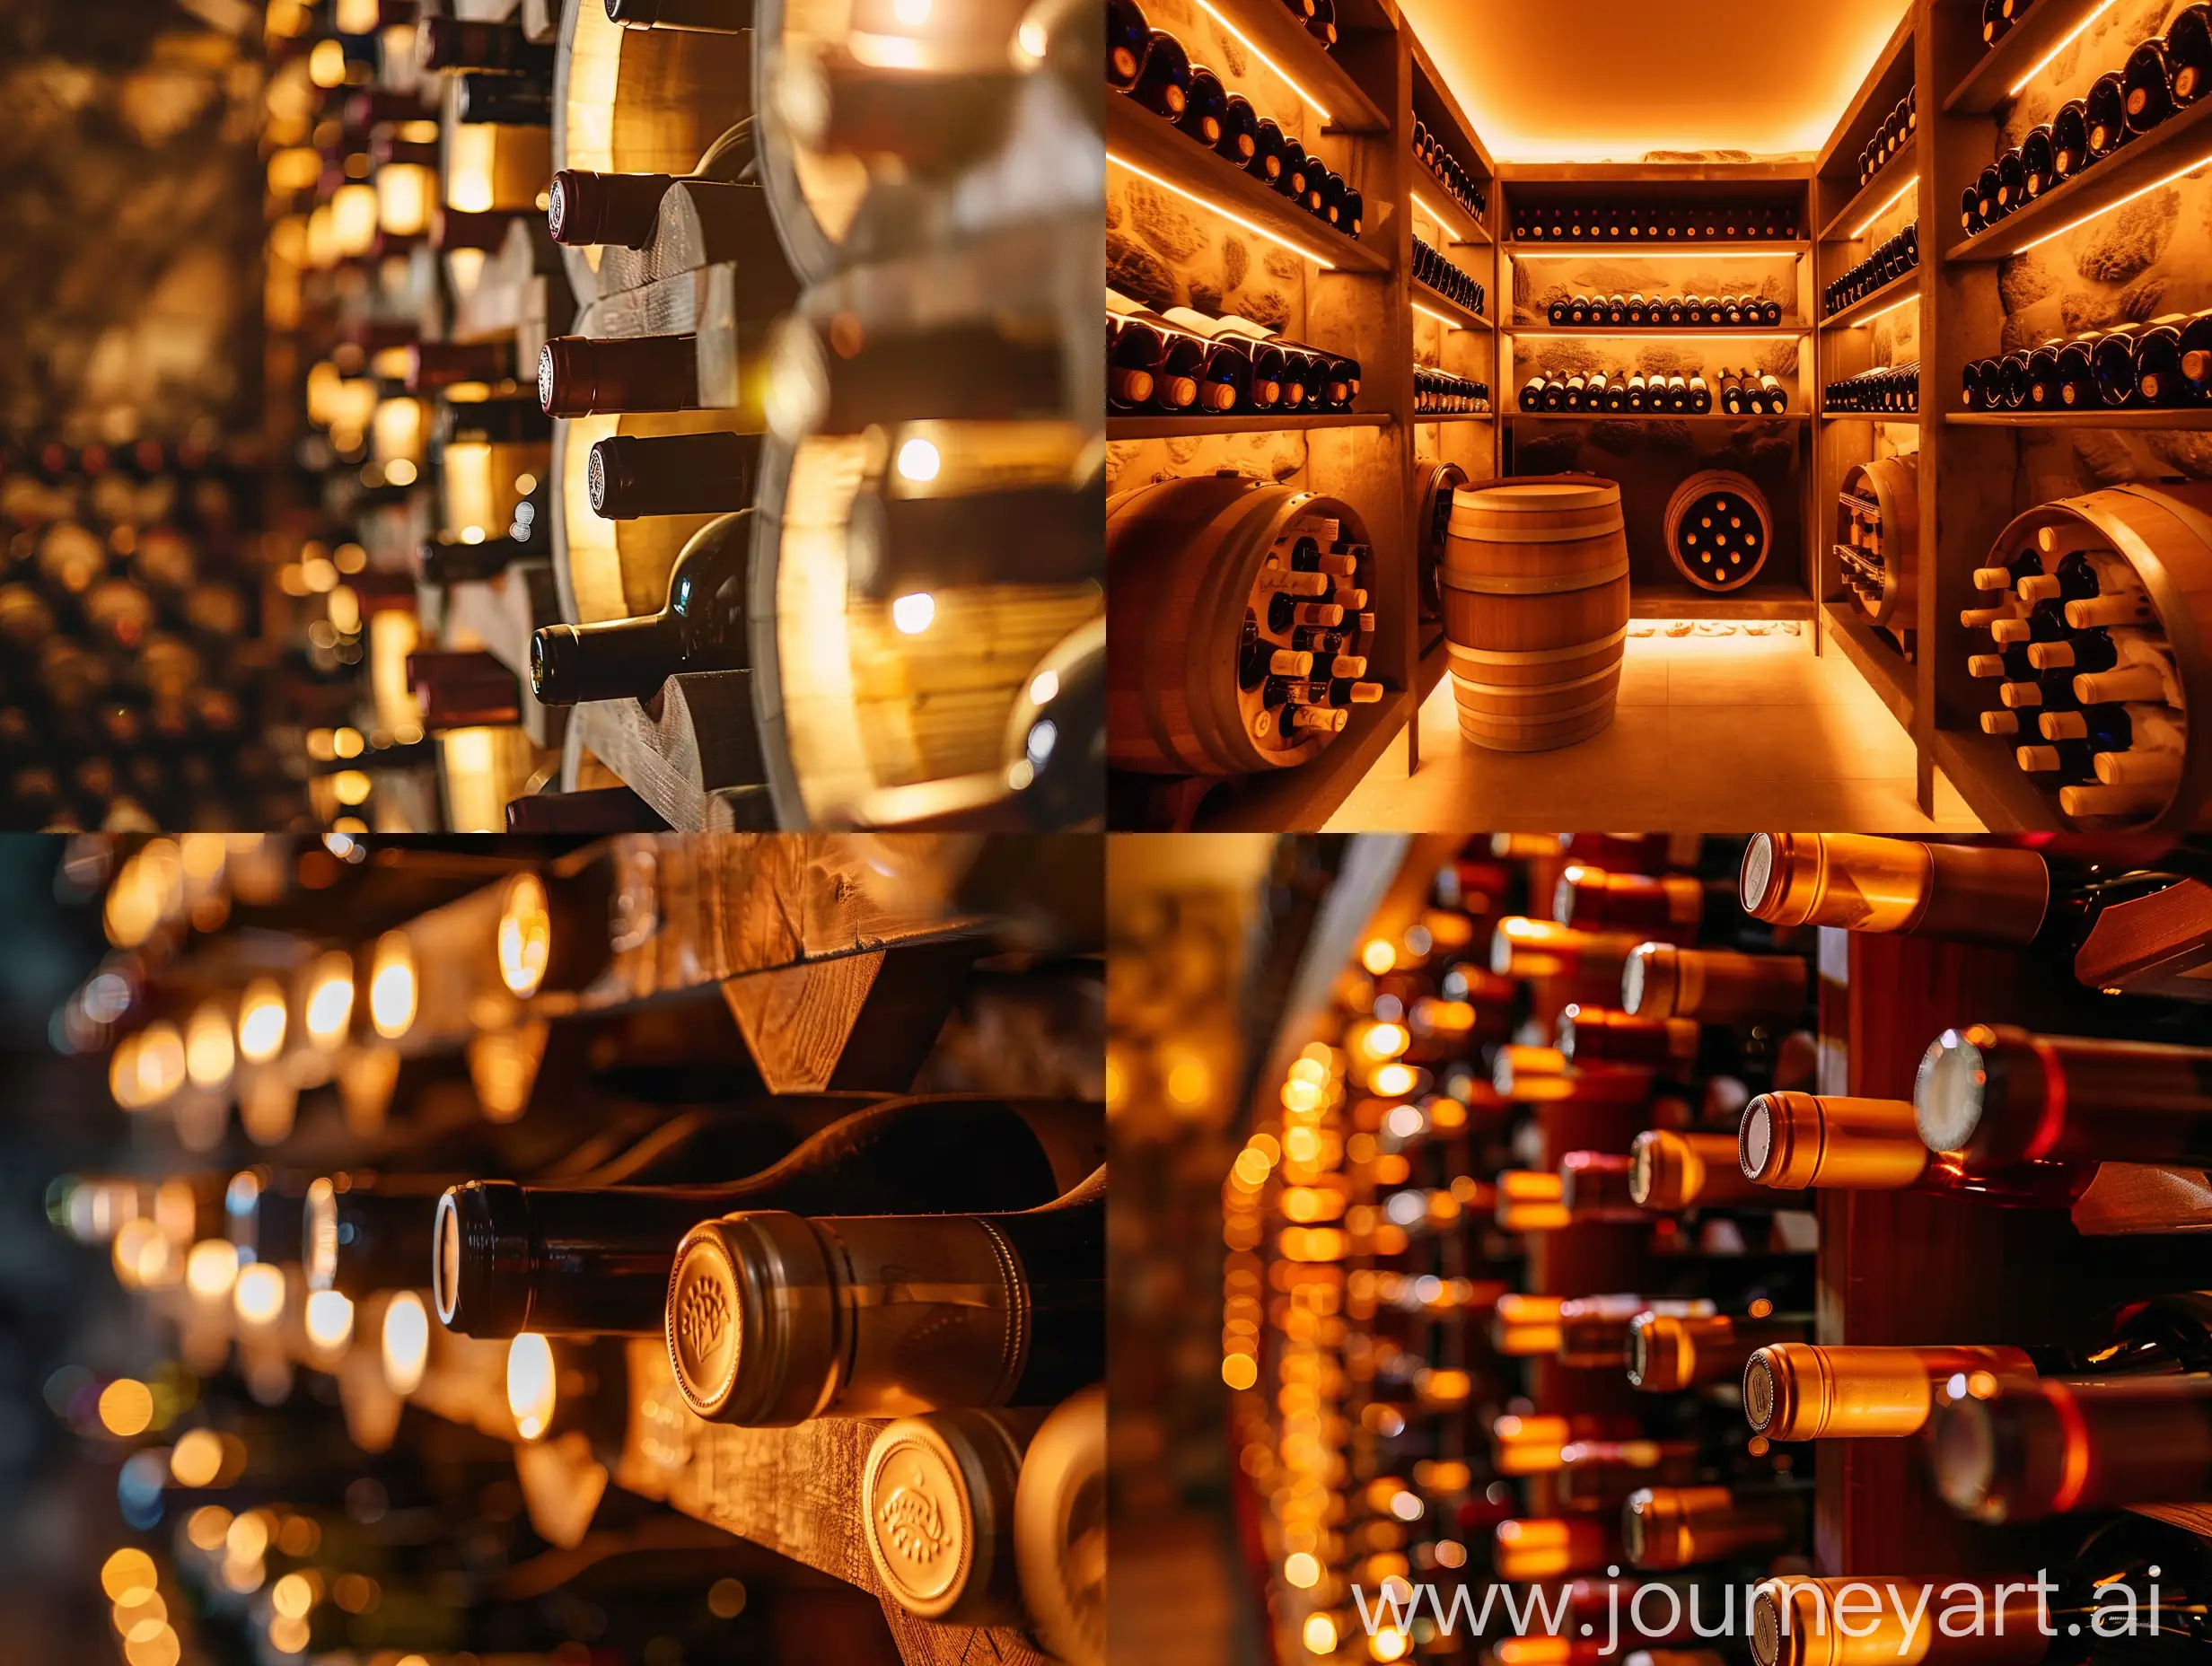 Cozy-Wine-Cellar-with-Warm-Lighting-Perfect-Background-for-Wine-Magazine